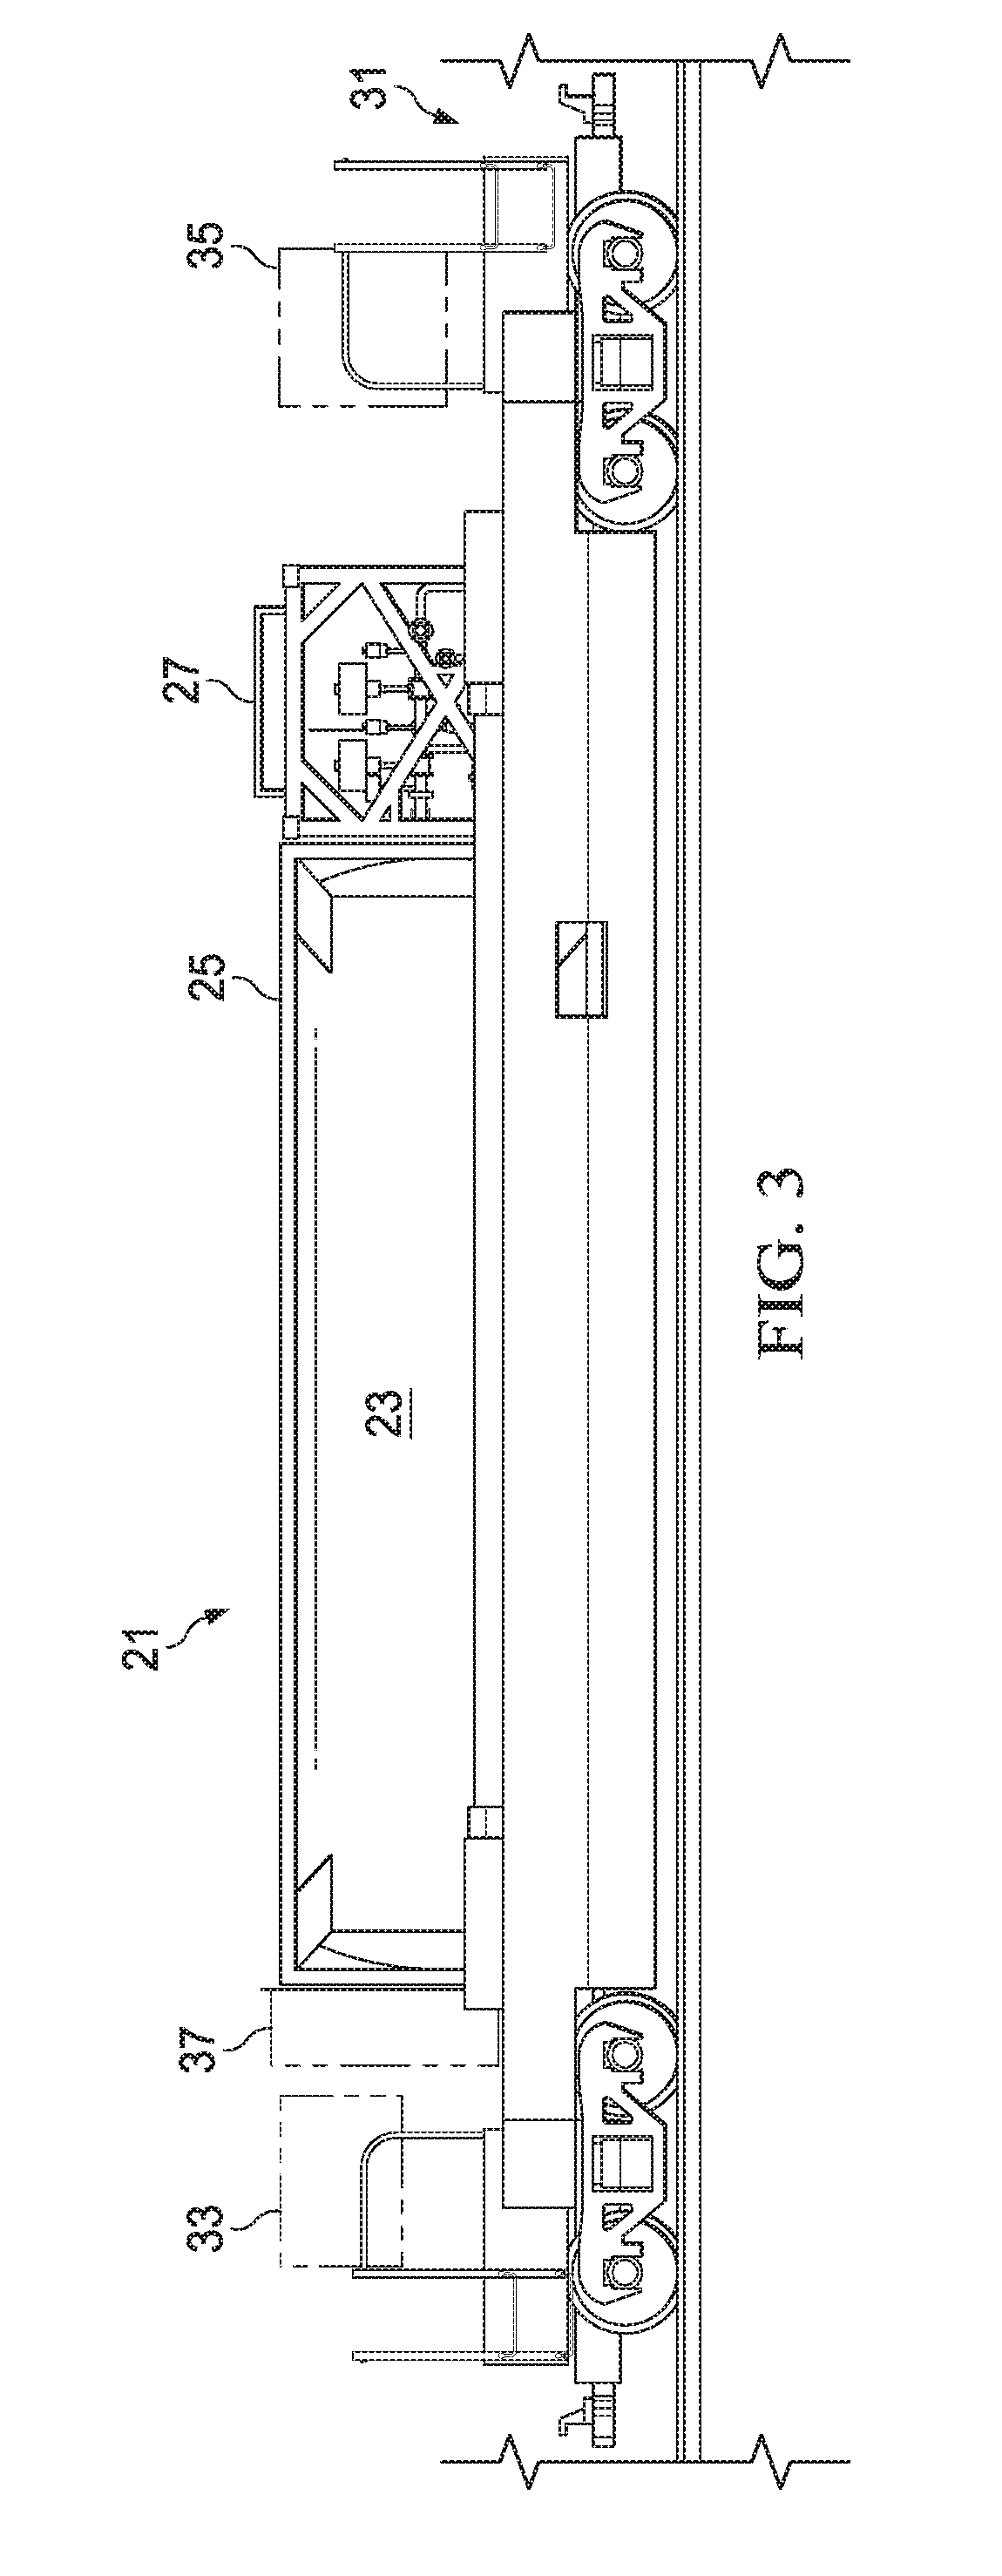 System, method and apparatus for modular, mobile rail fueling